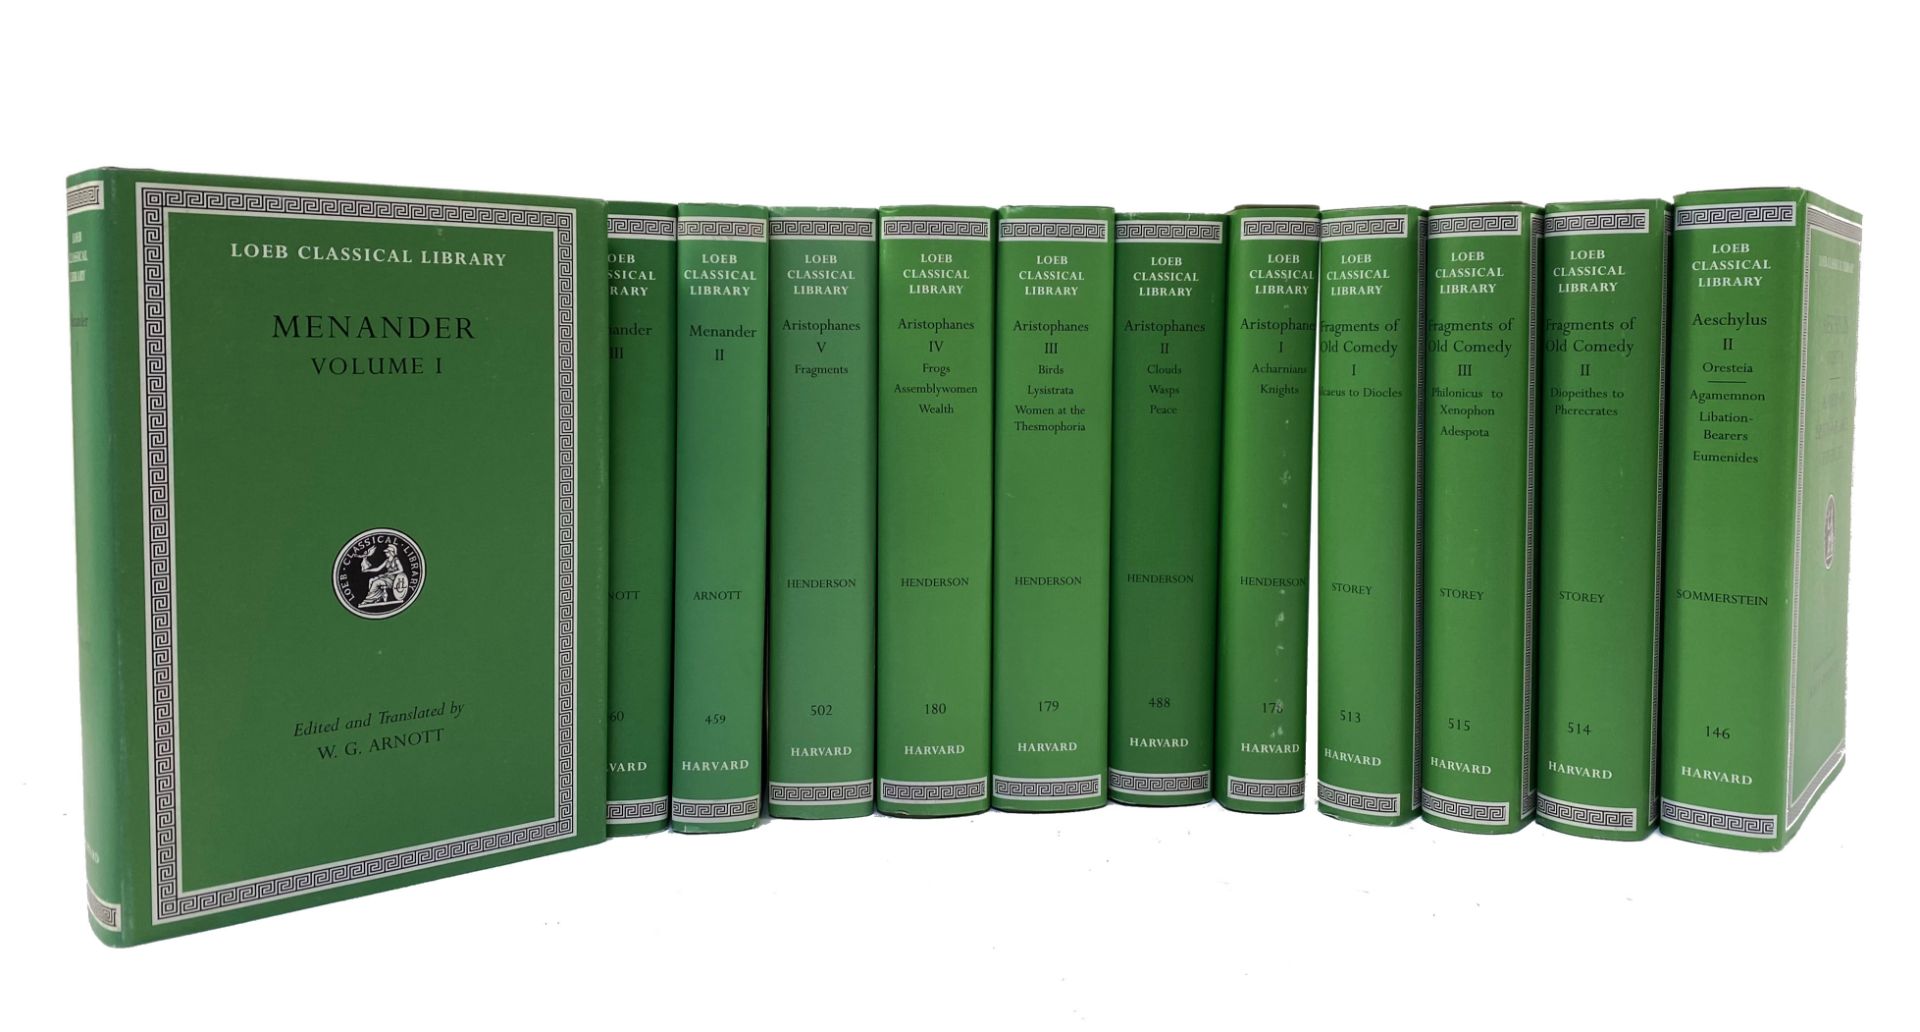 LOEB CLASSICAL LIBRARY -- ARISTOPHANES. (Ed.) by B.B. Rogers. 1998-2007. 5 vols. -- MENANDER